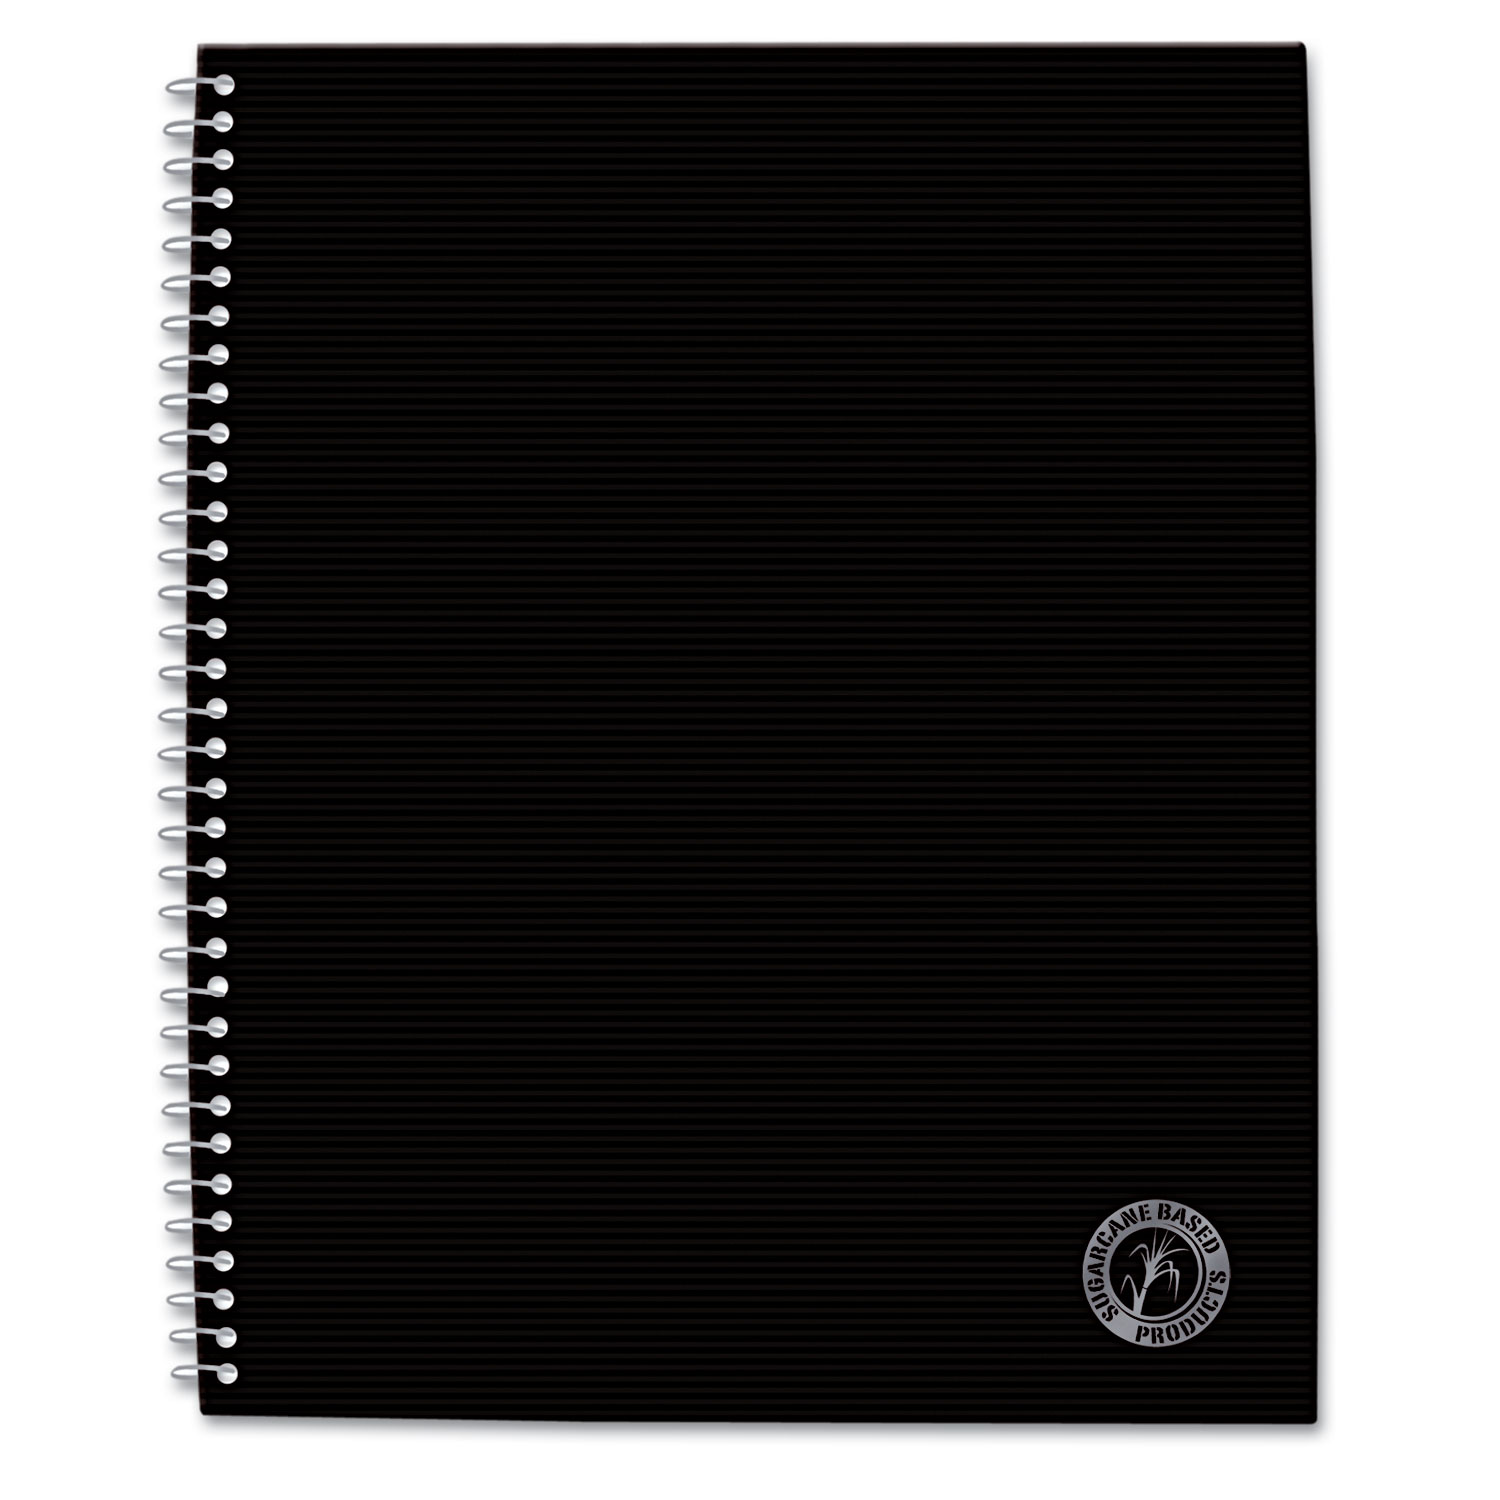  Universal UNV66206 Deluxe Sugarcane Based Notebooks, 1 Subject, Medium/College Rule, Black Cover, 11 x 8.5, 100 Sheets (UNV66206) 